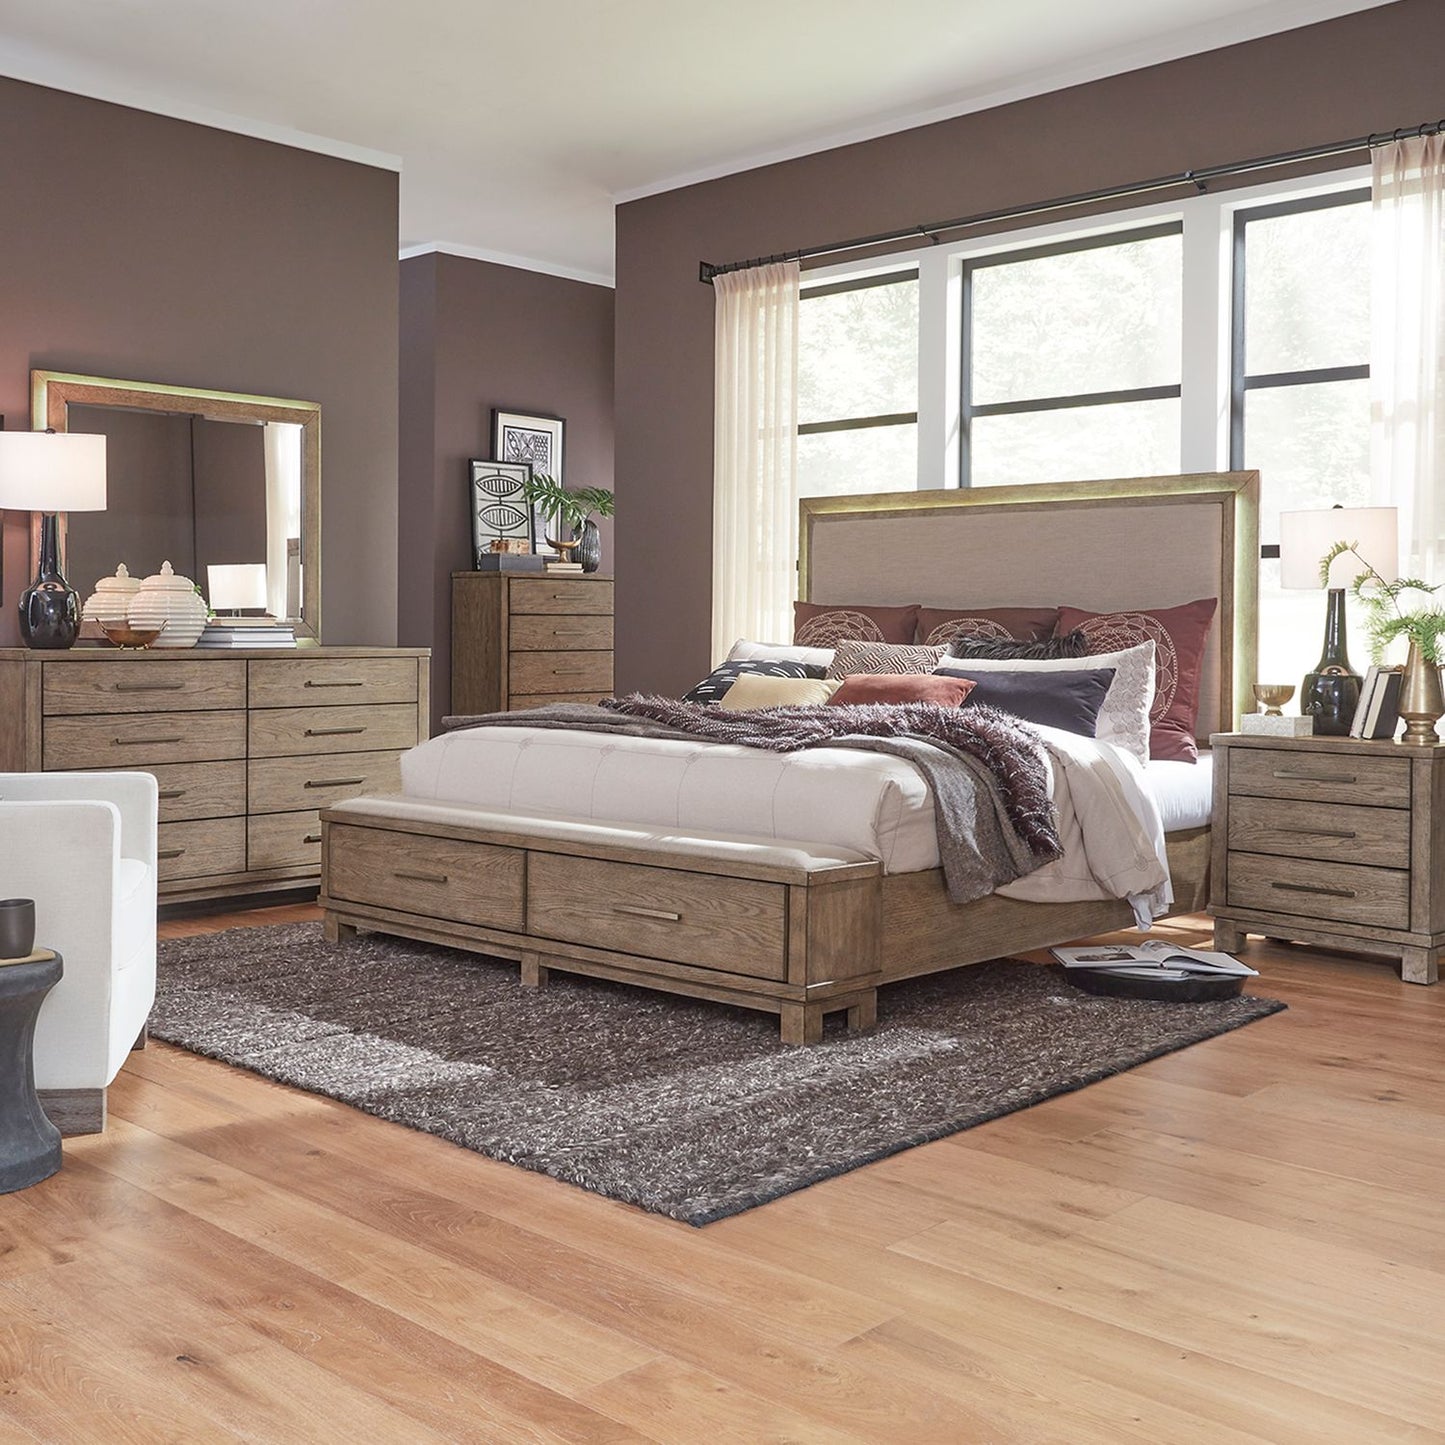 Canyon Road - King Storage Bed, Dresser & Mirror, Chest, Night Stand